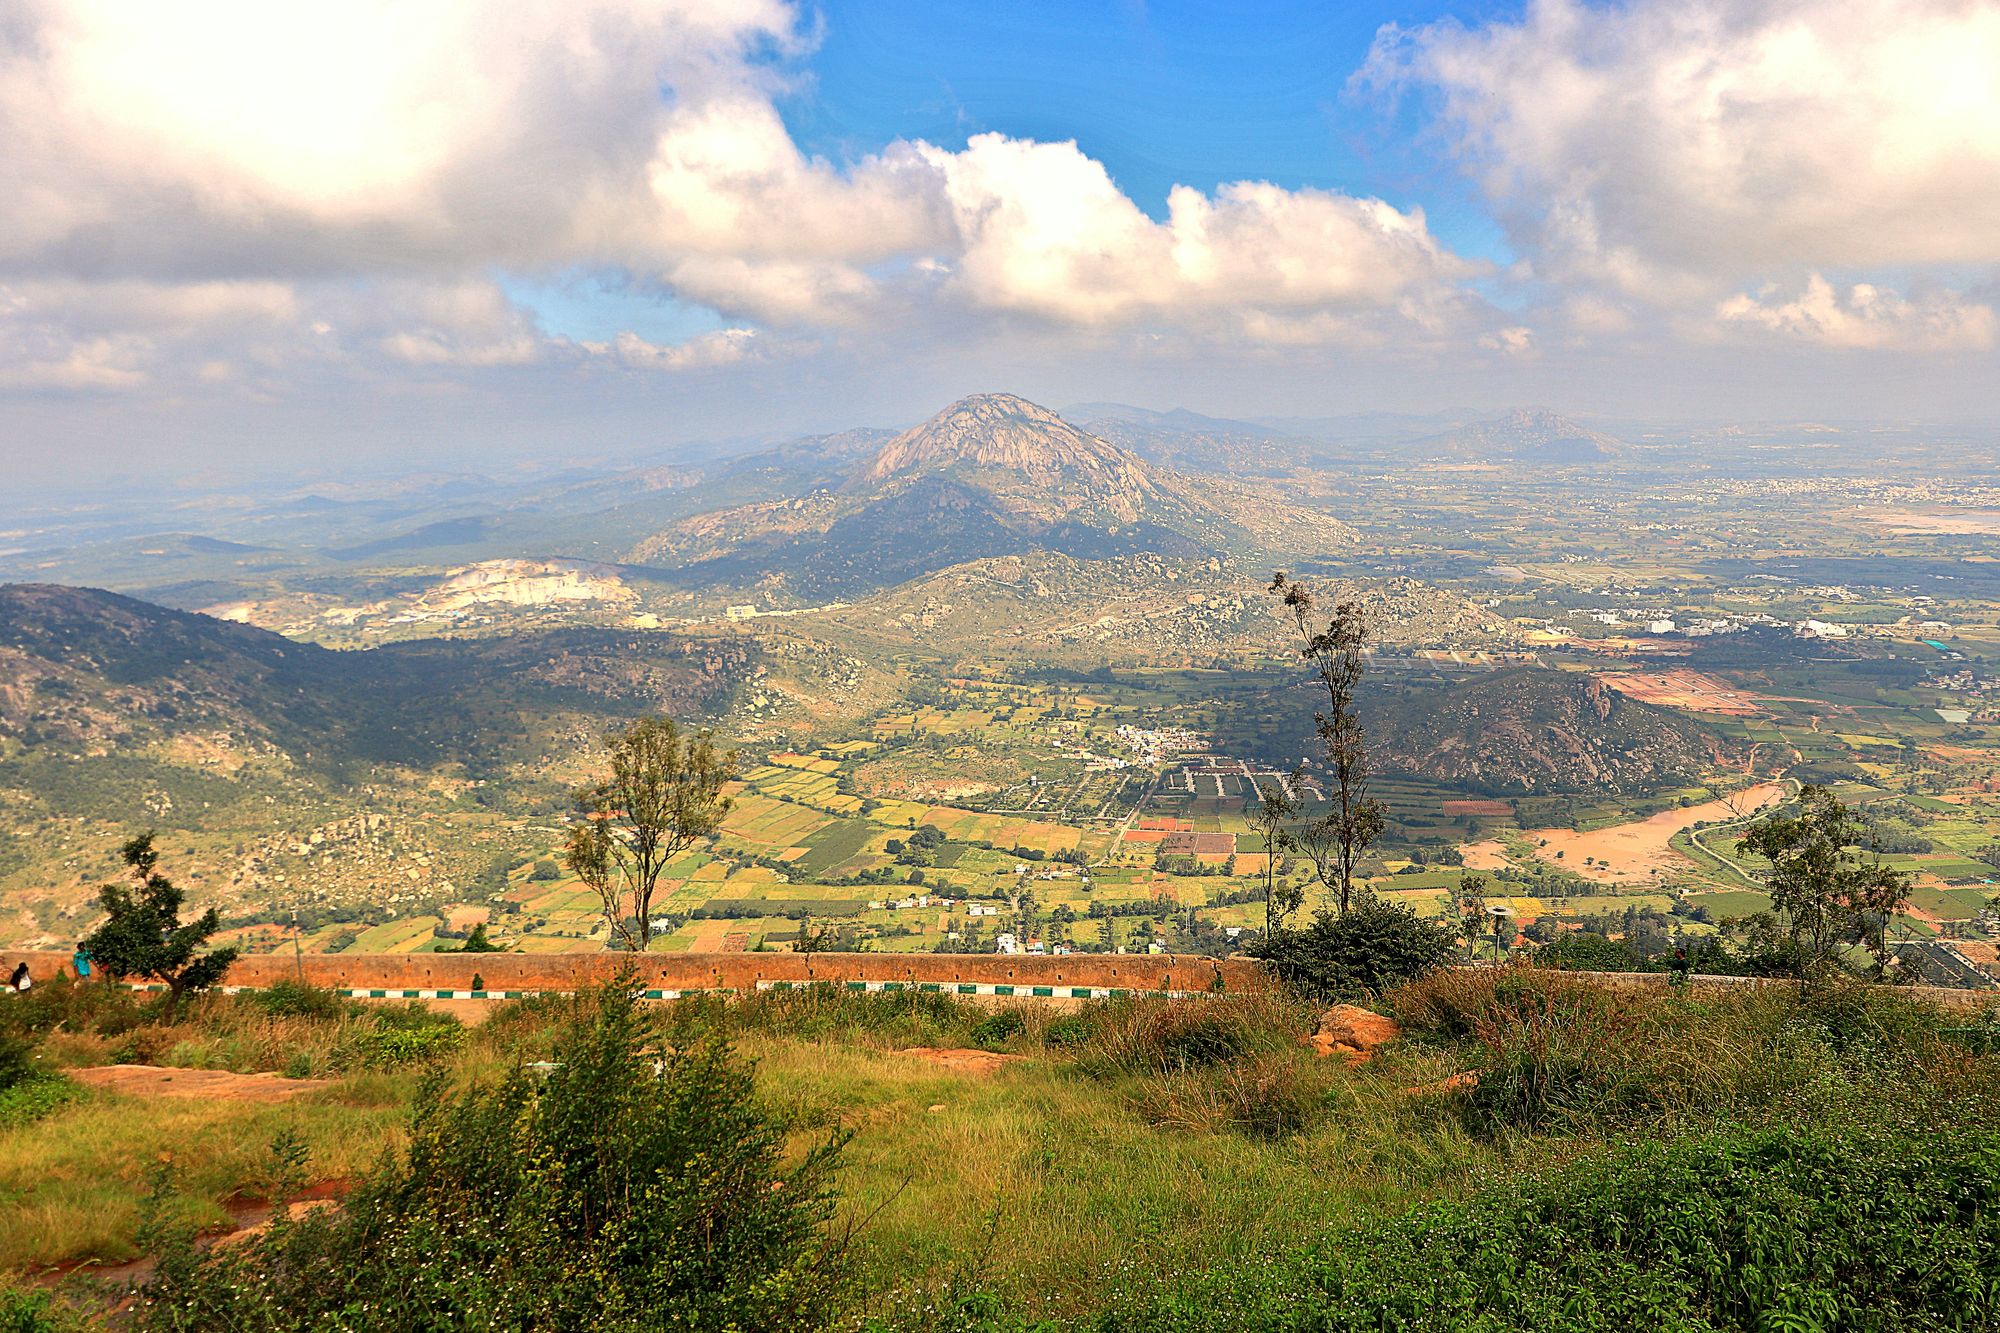 Nandi Hills to Open Up from September 7, from 8 AM to 5 PM